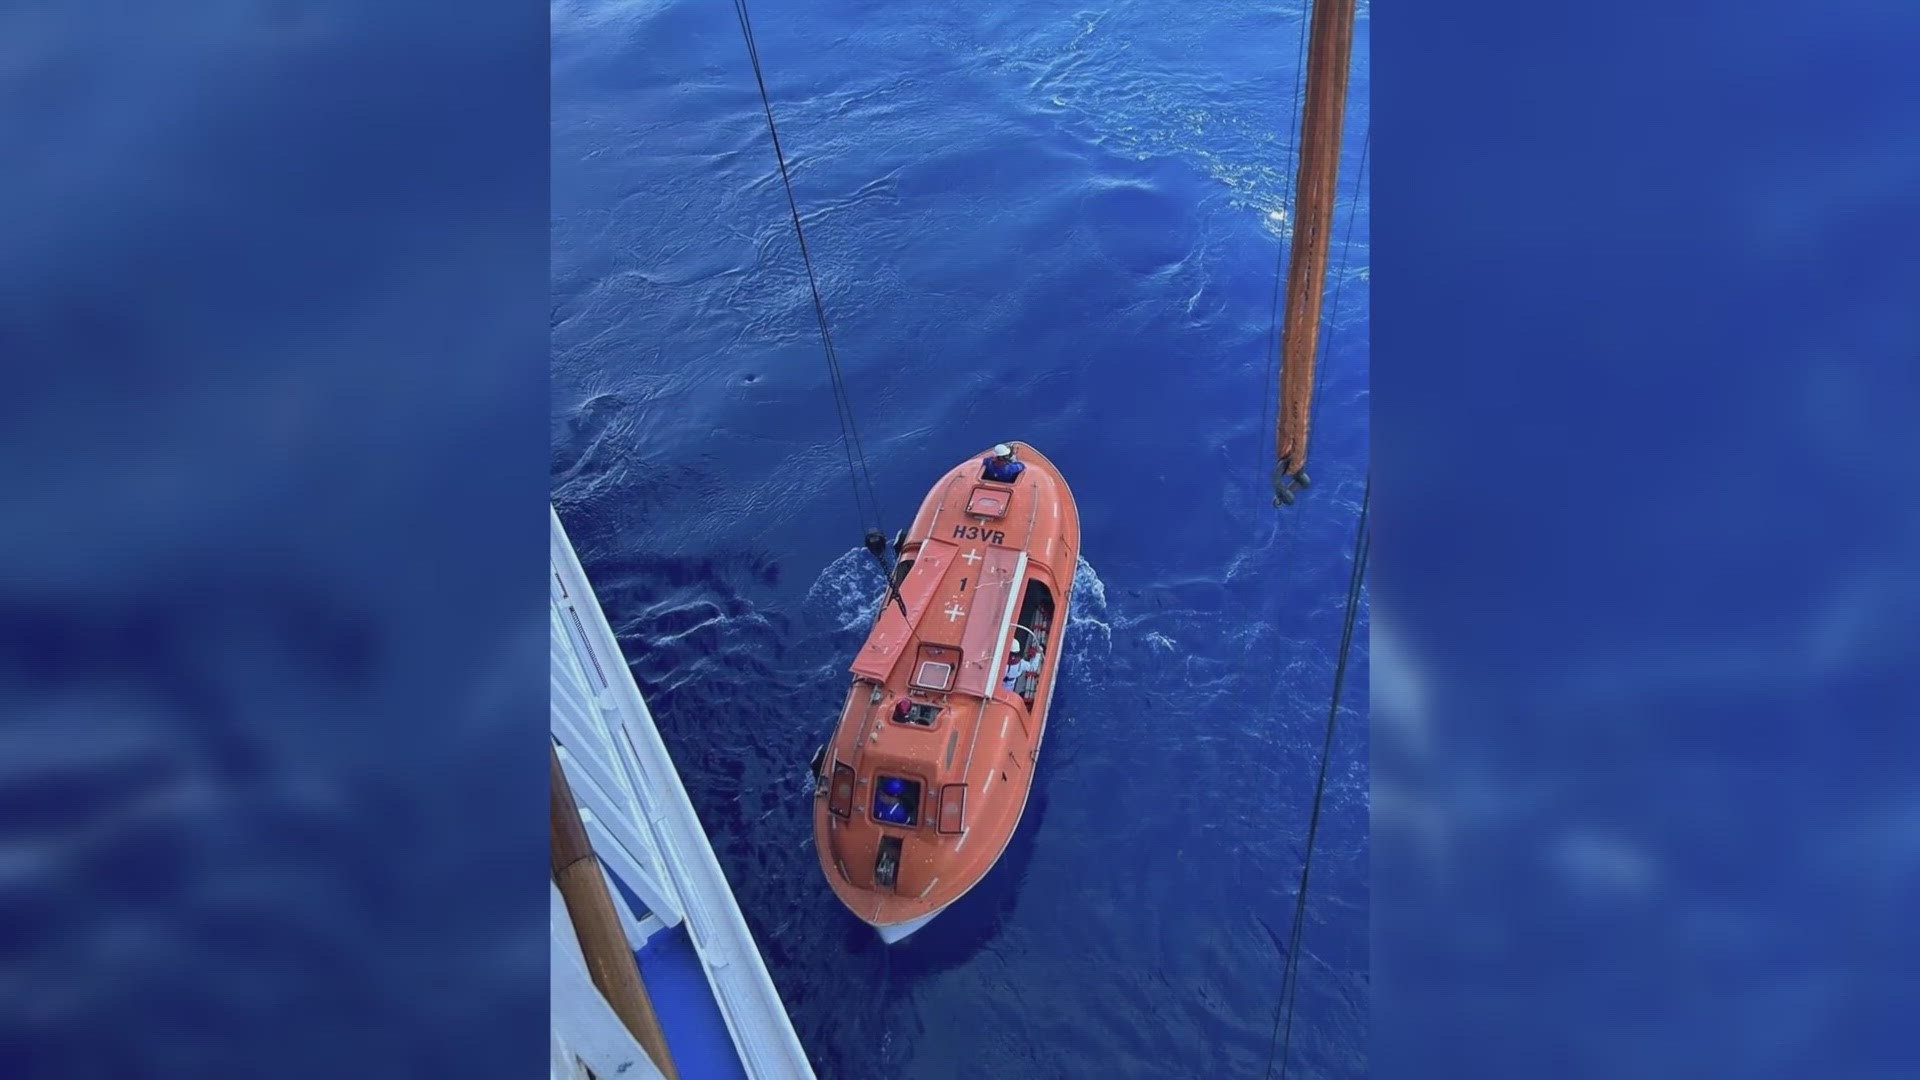 Crew members from the cruise ship responded to a request from the U.S. Coast Guard to rescue the stranded boaters.